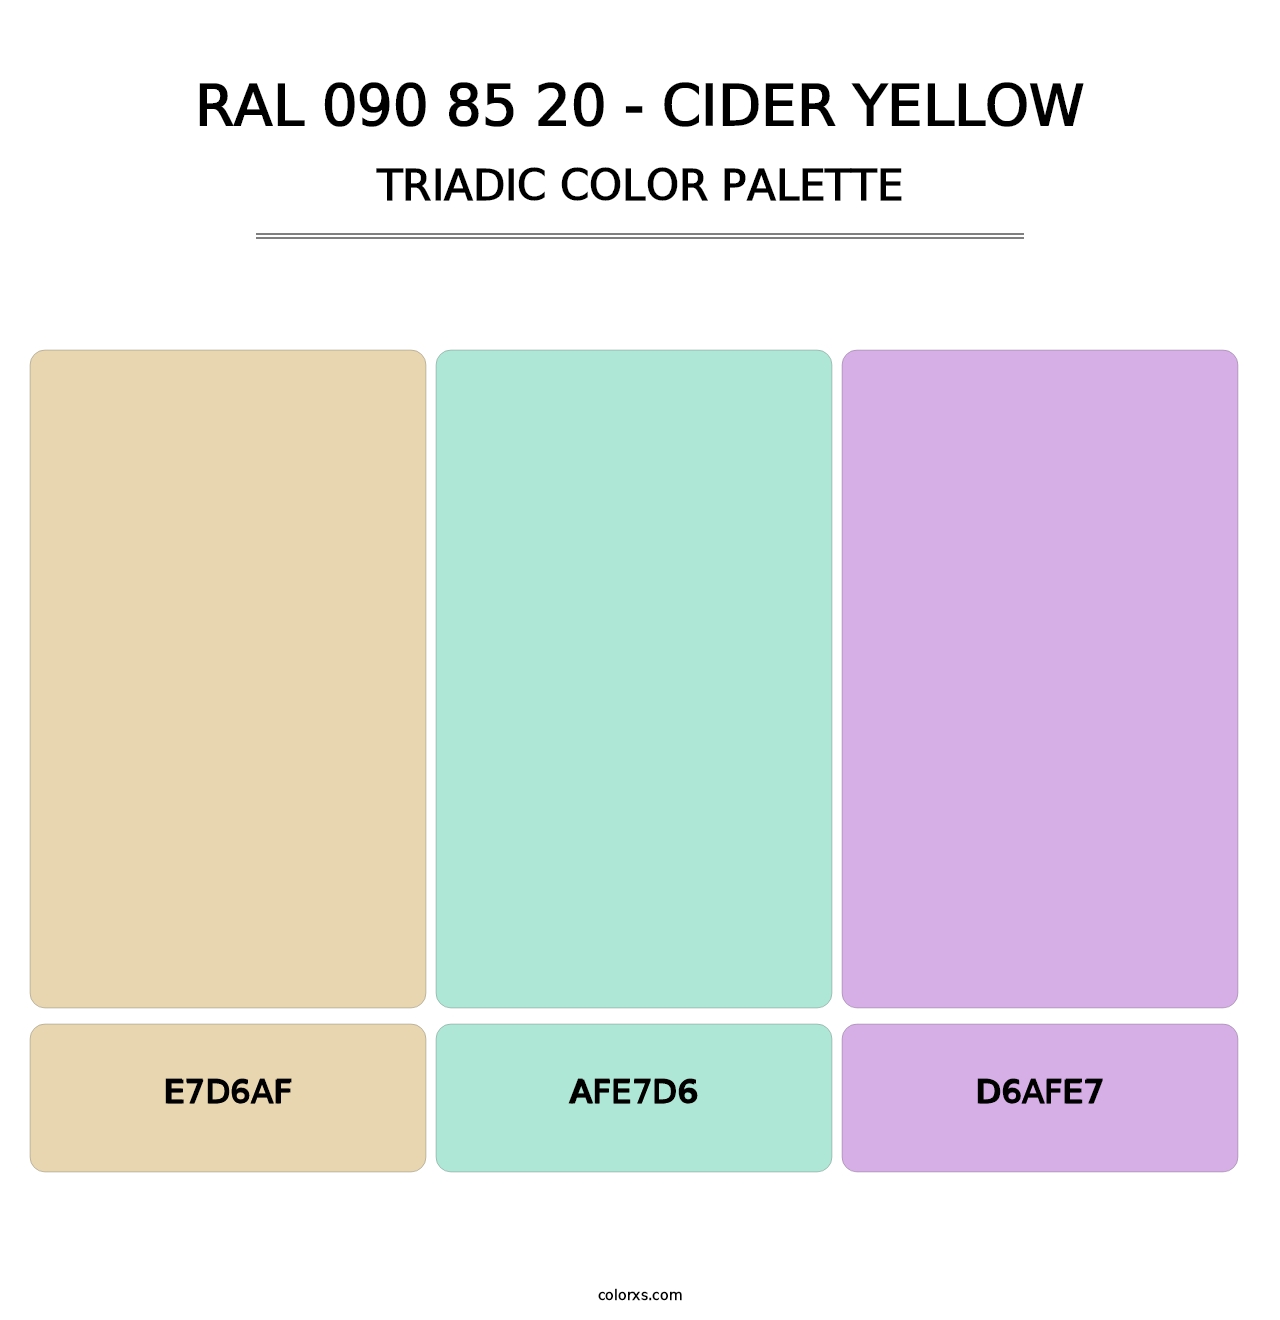 RAL 090 85 20 - Cider Yellow - Triadic Color Palette